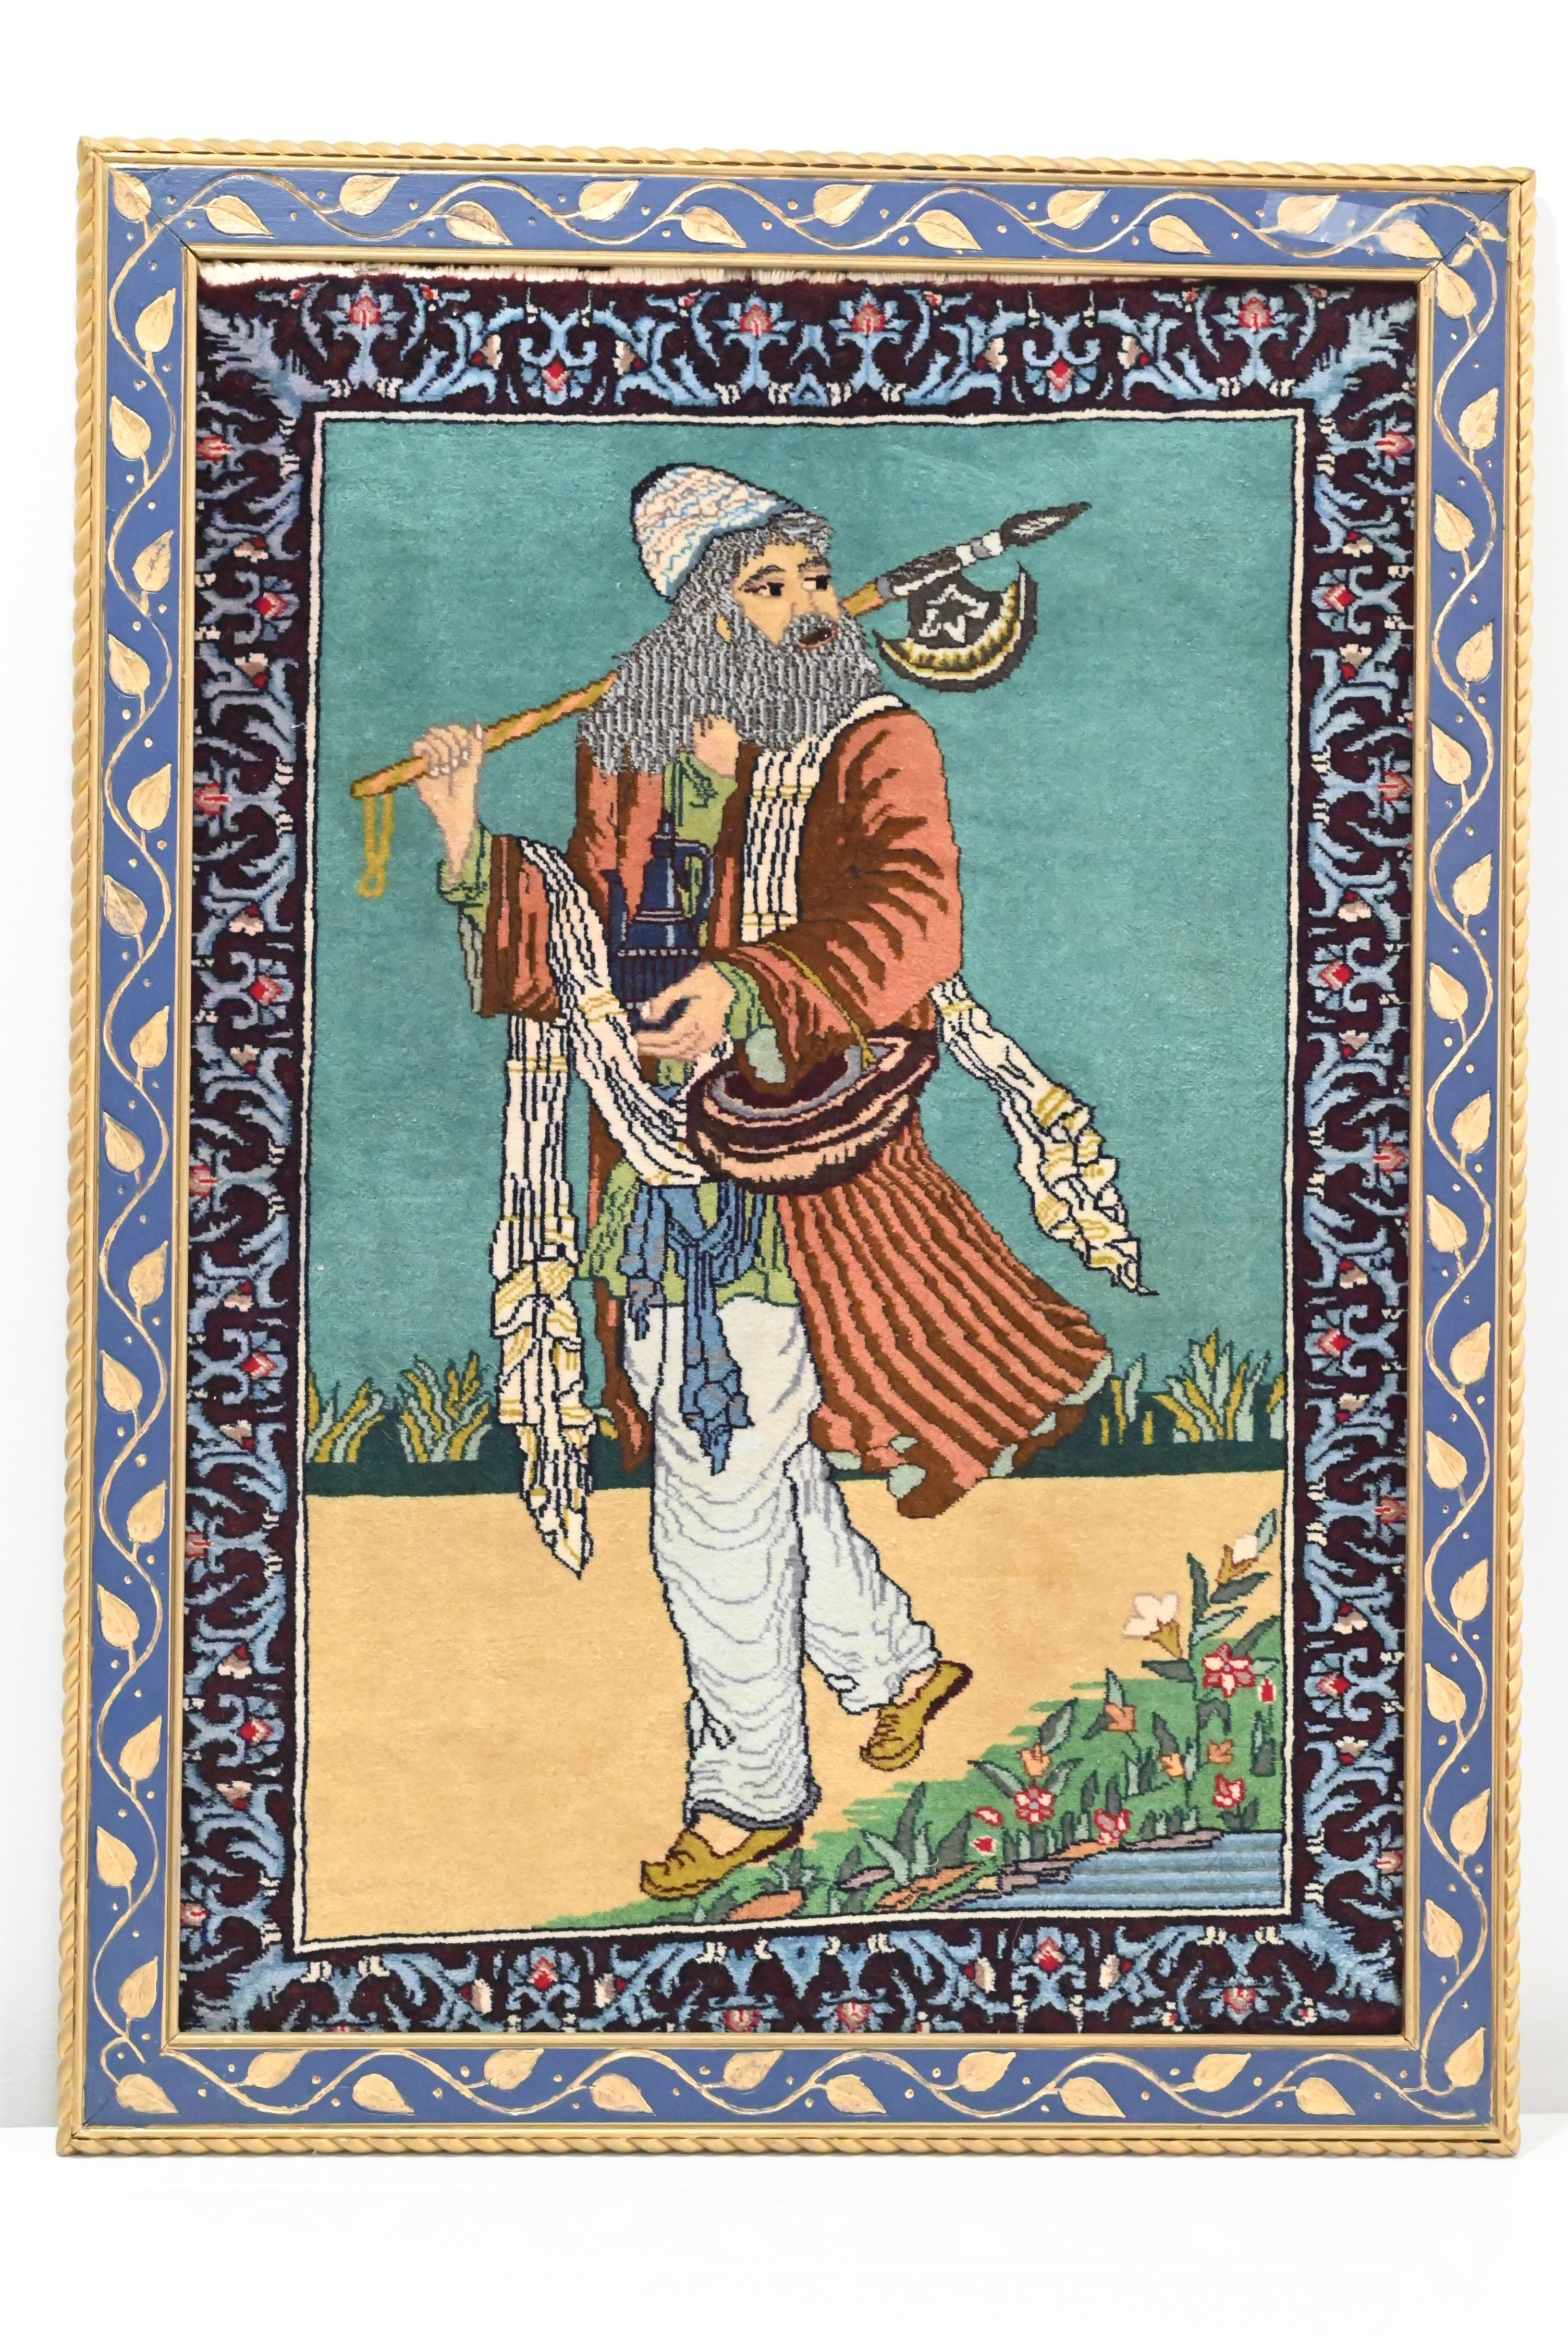 Gorgeous Persian Tabriz carpet with portrait scenery of figure. The figure seems to be holding a ax, while gazing behind him. Wearing a vivid orange outer garment with traditional clothing of the 17th / 18th century of Persia.  The condition is